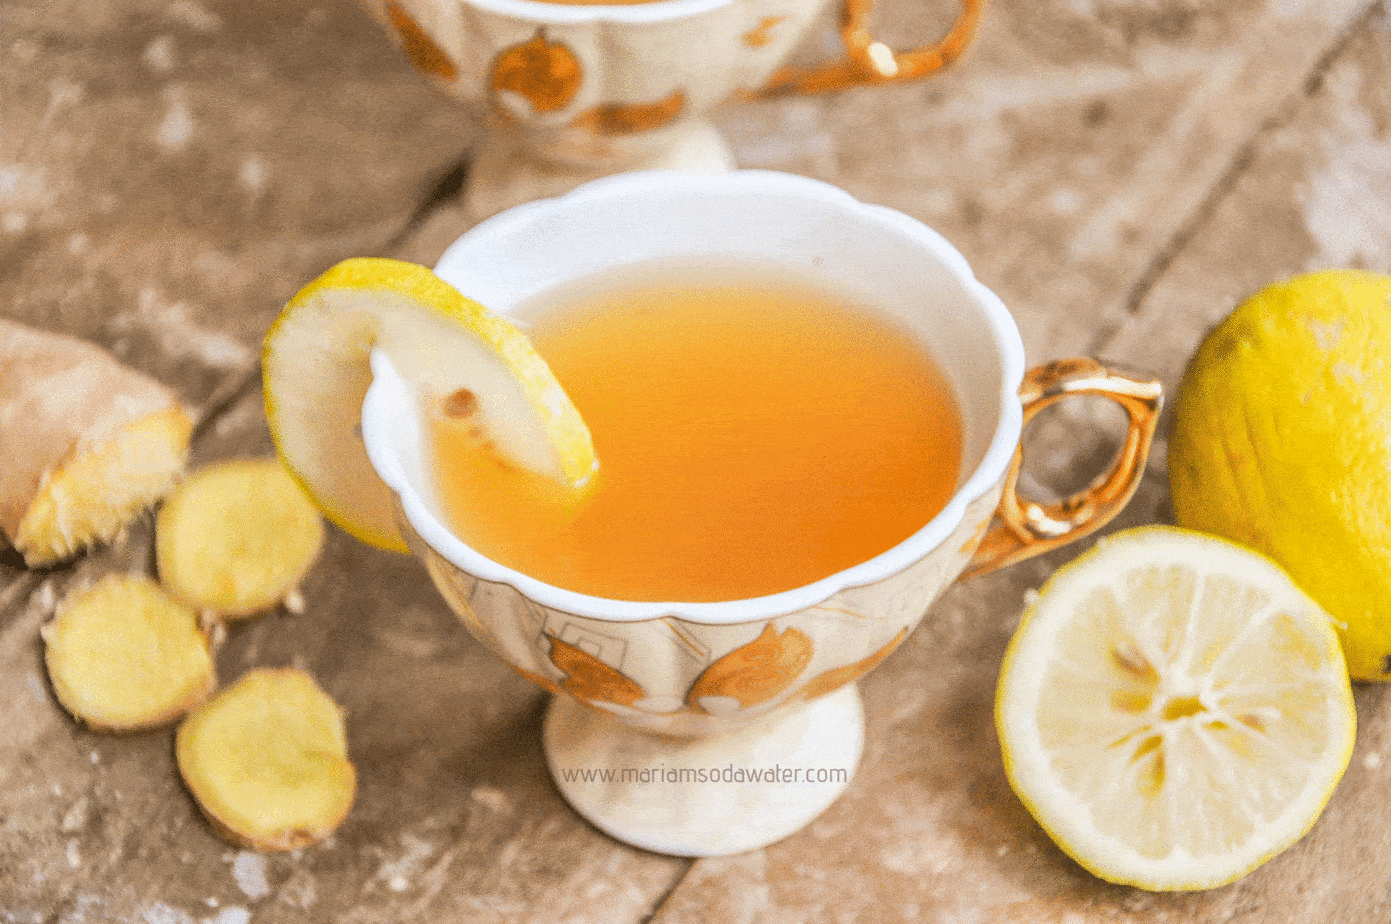 ginger green tea served in a cup with a slice of lemon.